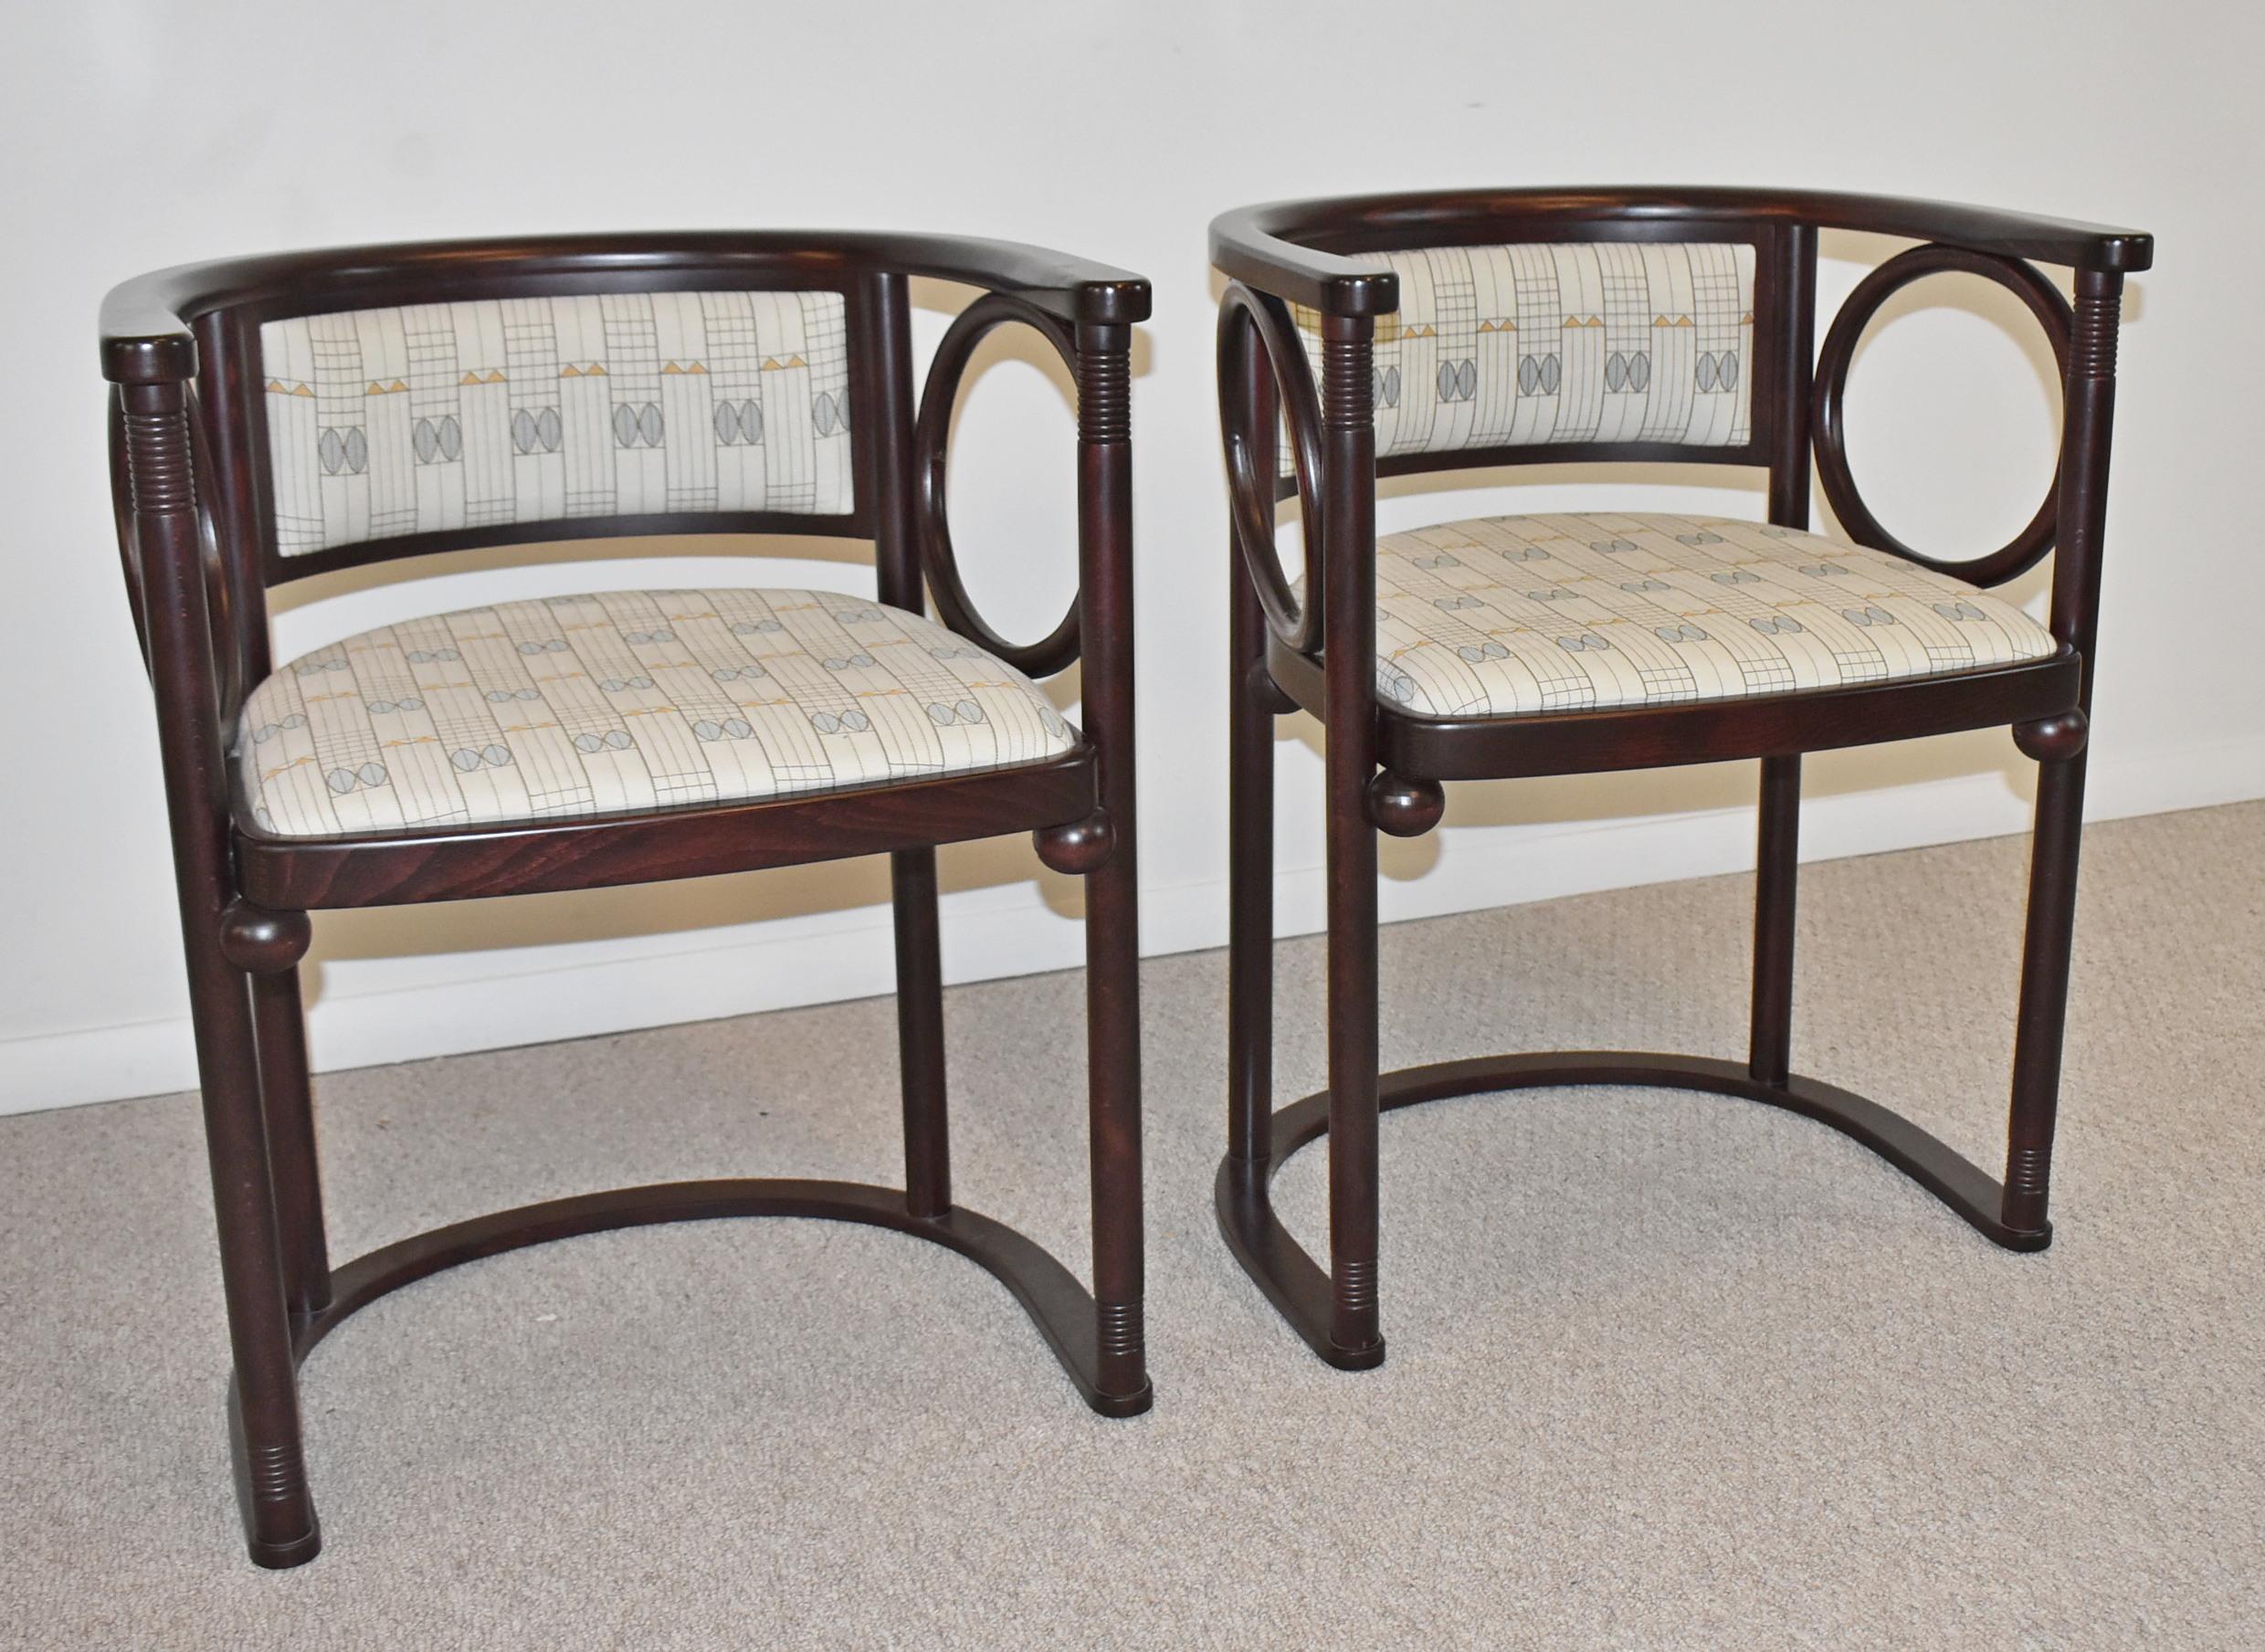 Josef Hoffmann Pedestal Fledermaus Table and 2 Chairs by Wittmann Art Deco styling. Bentwood Chairs upholstered back and seat. Table and Chairs are stamped 